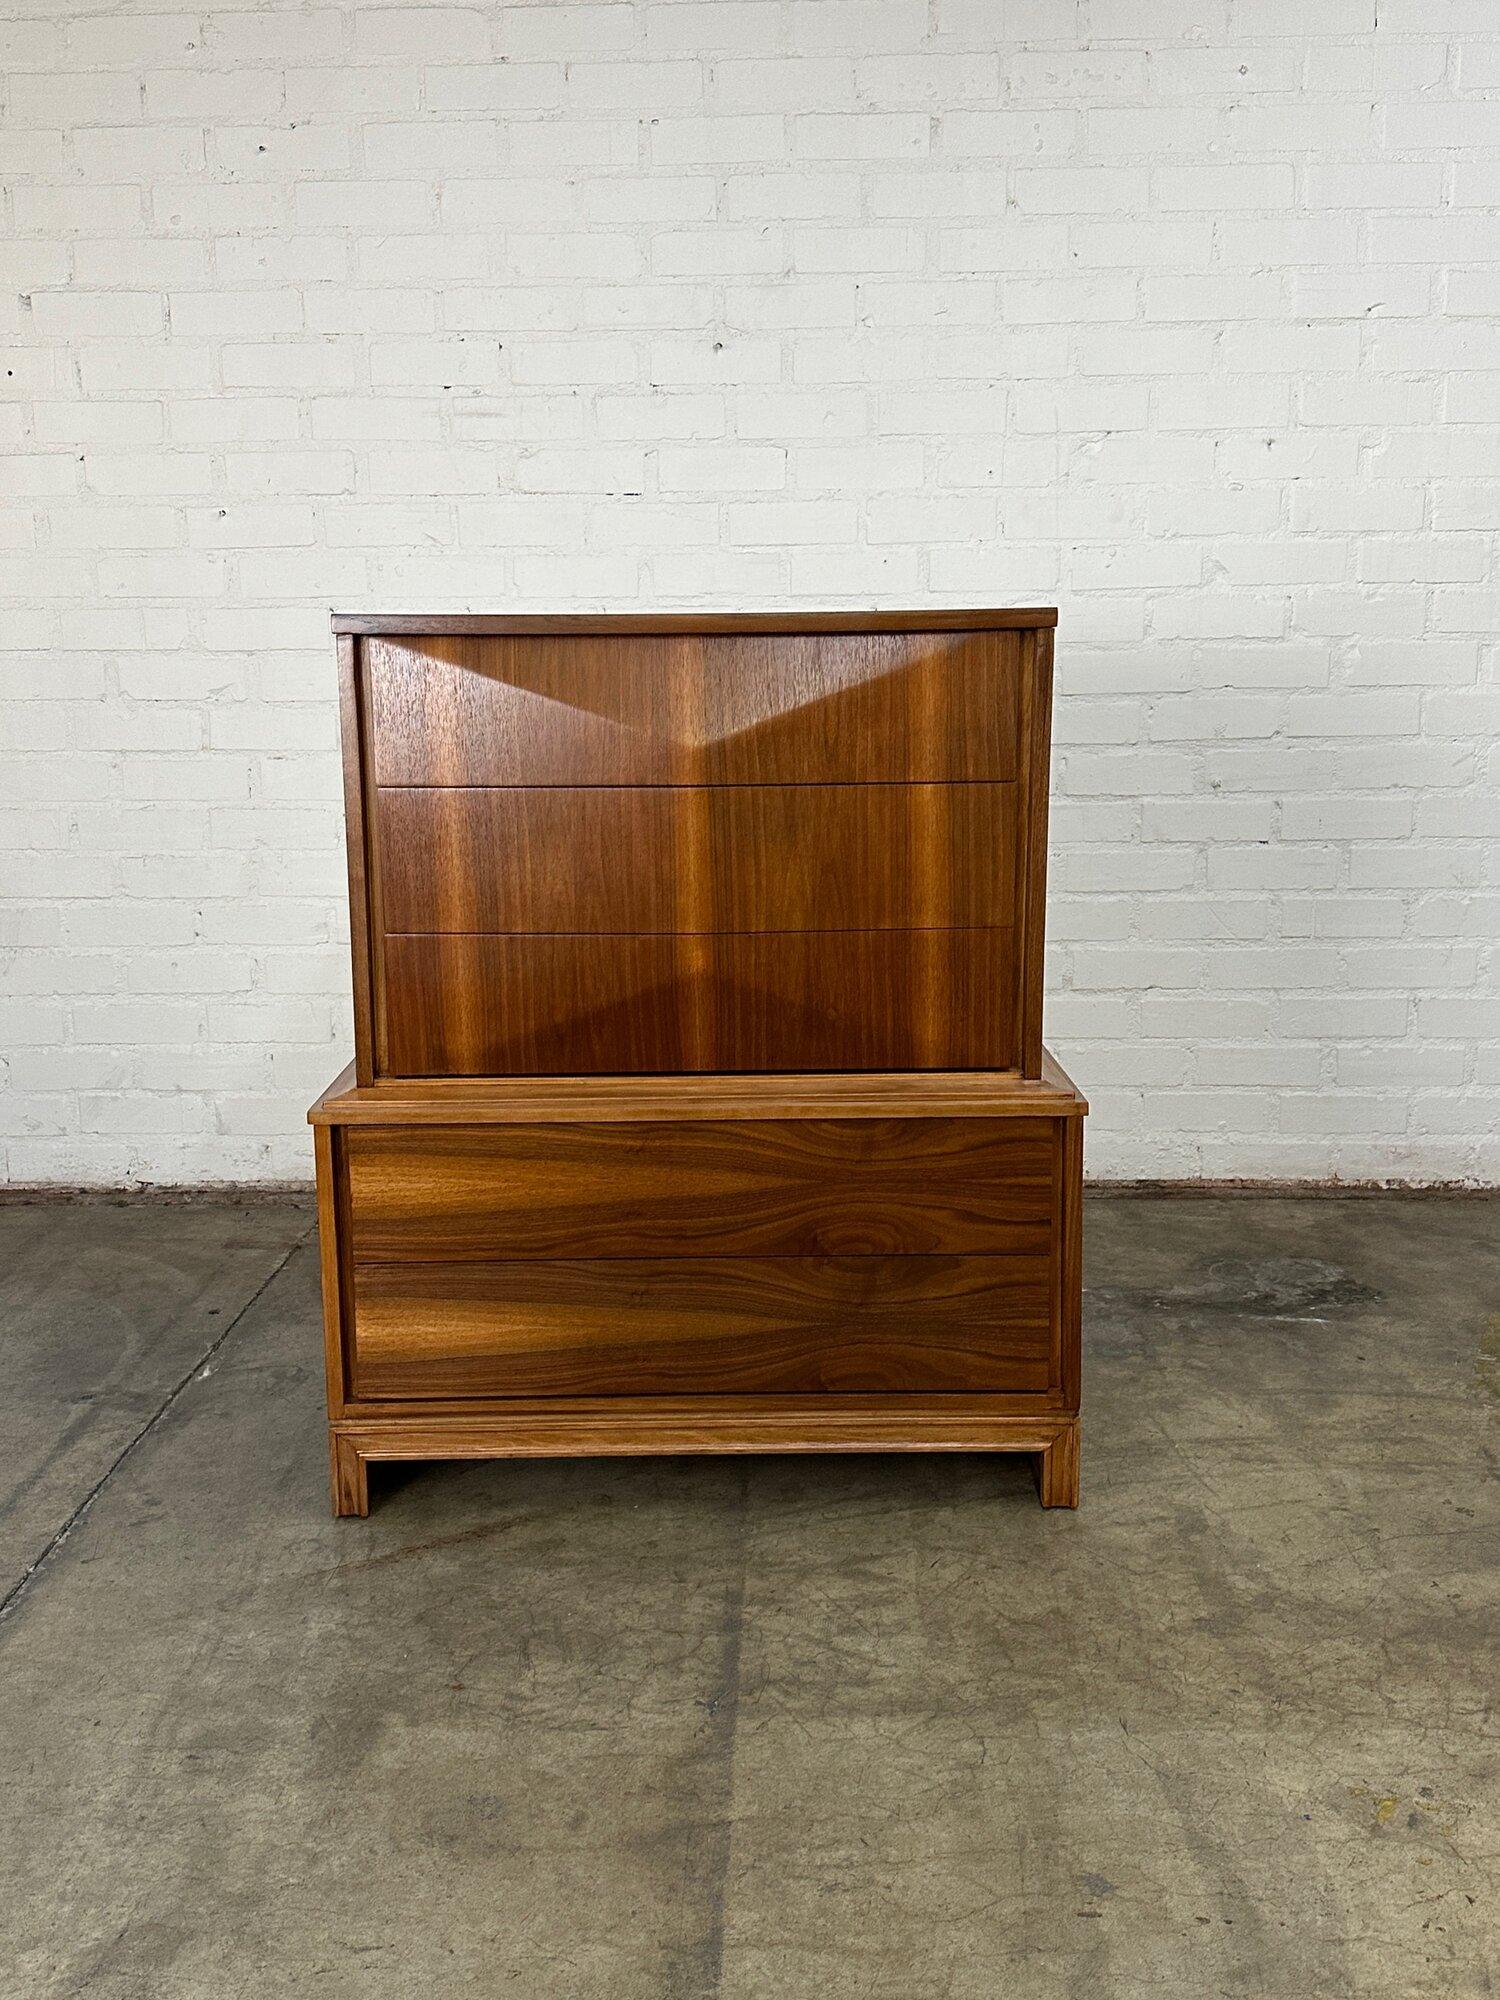 W40 D20 H47.5

Fully restored walnut highboy dresser. Item features exceptional walnut grain and has been clear coated to show natural wood tones. Item features hidden pulls on the sides and a great diamond surface on the top drawers. Highboy is